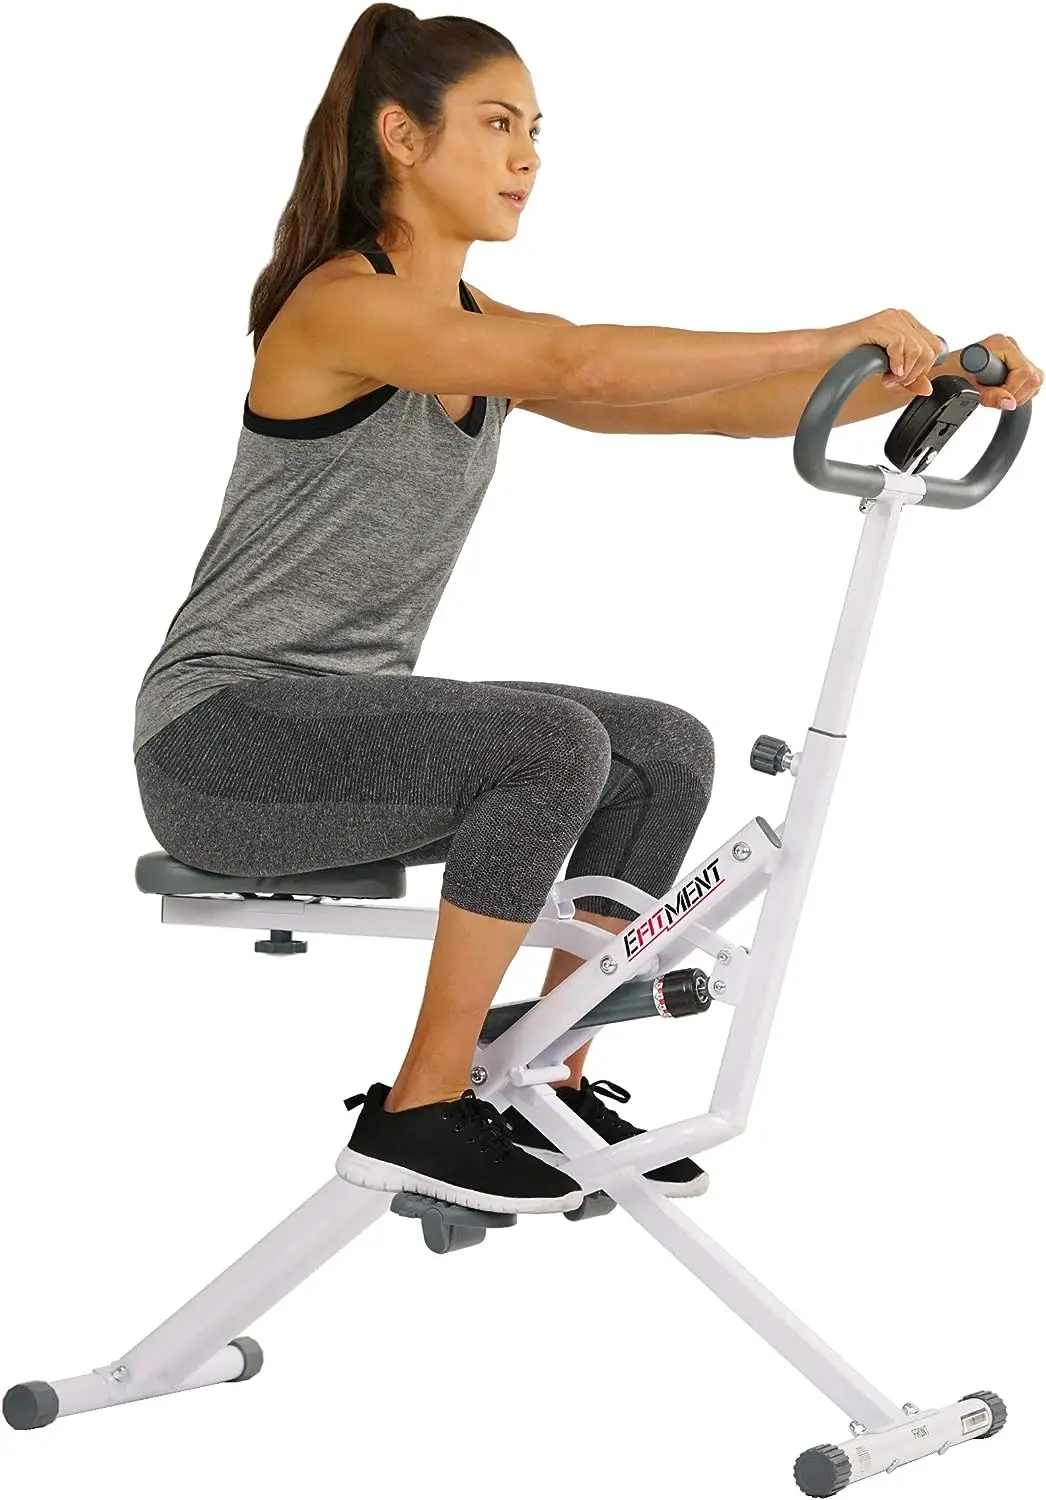 

Rower-Ride Exercise Trainer for Total Body Workout - SA022